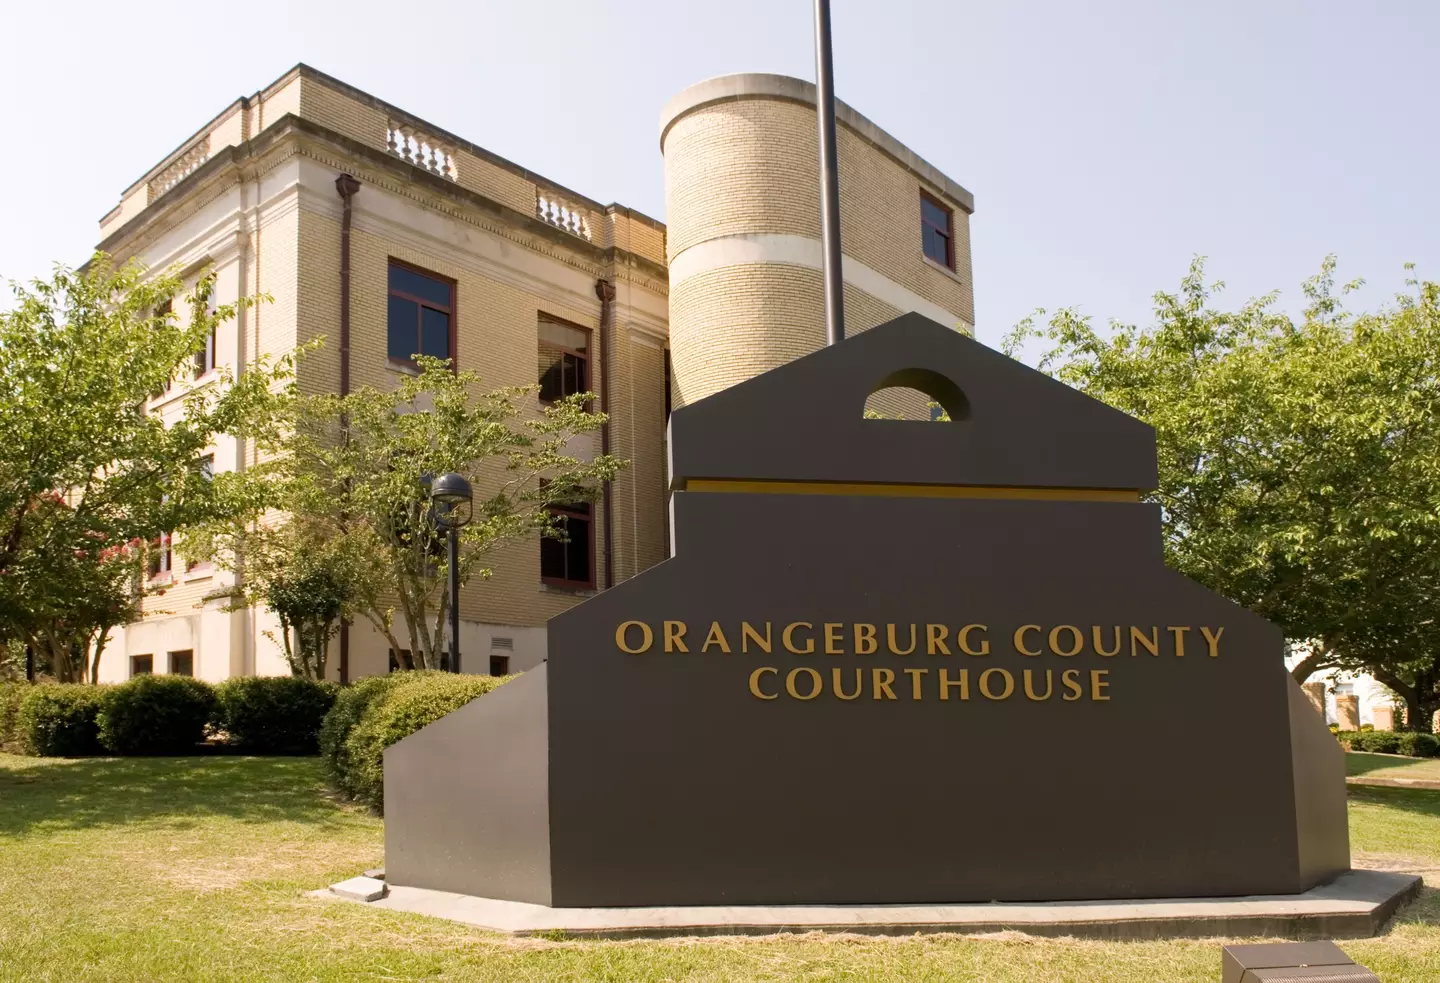 The incident took place at the Orangeburg County Courthouse in South Carolina.